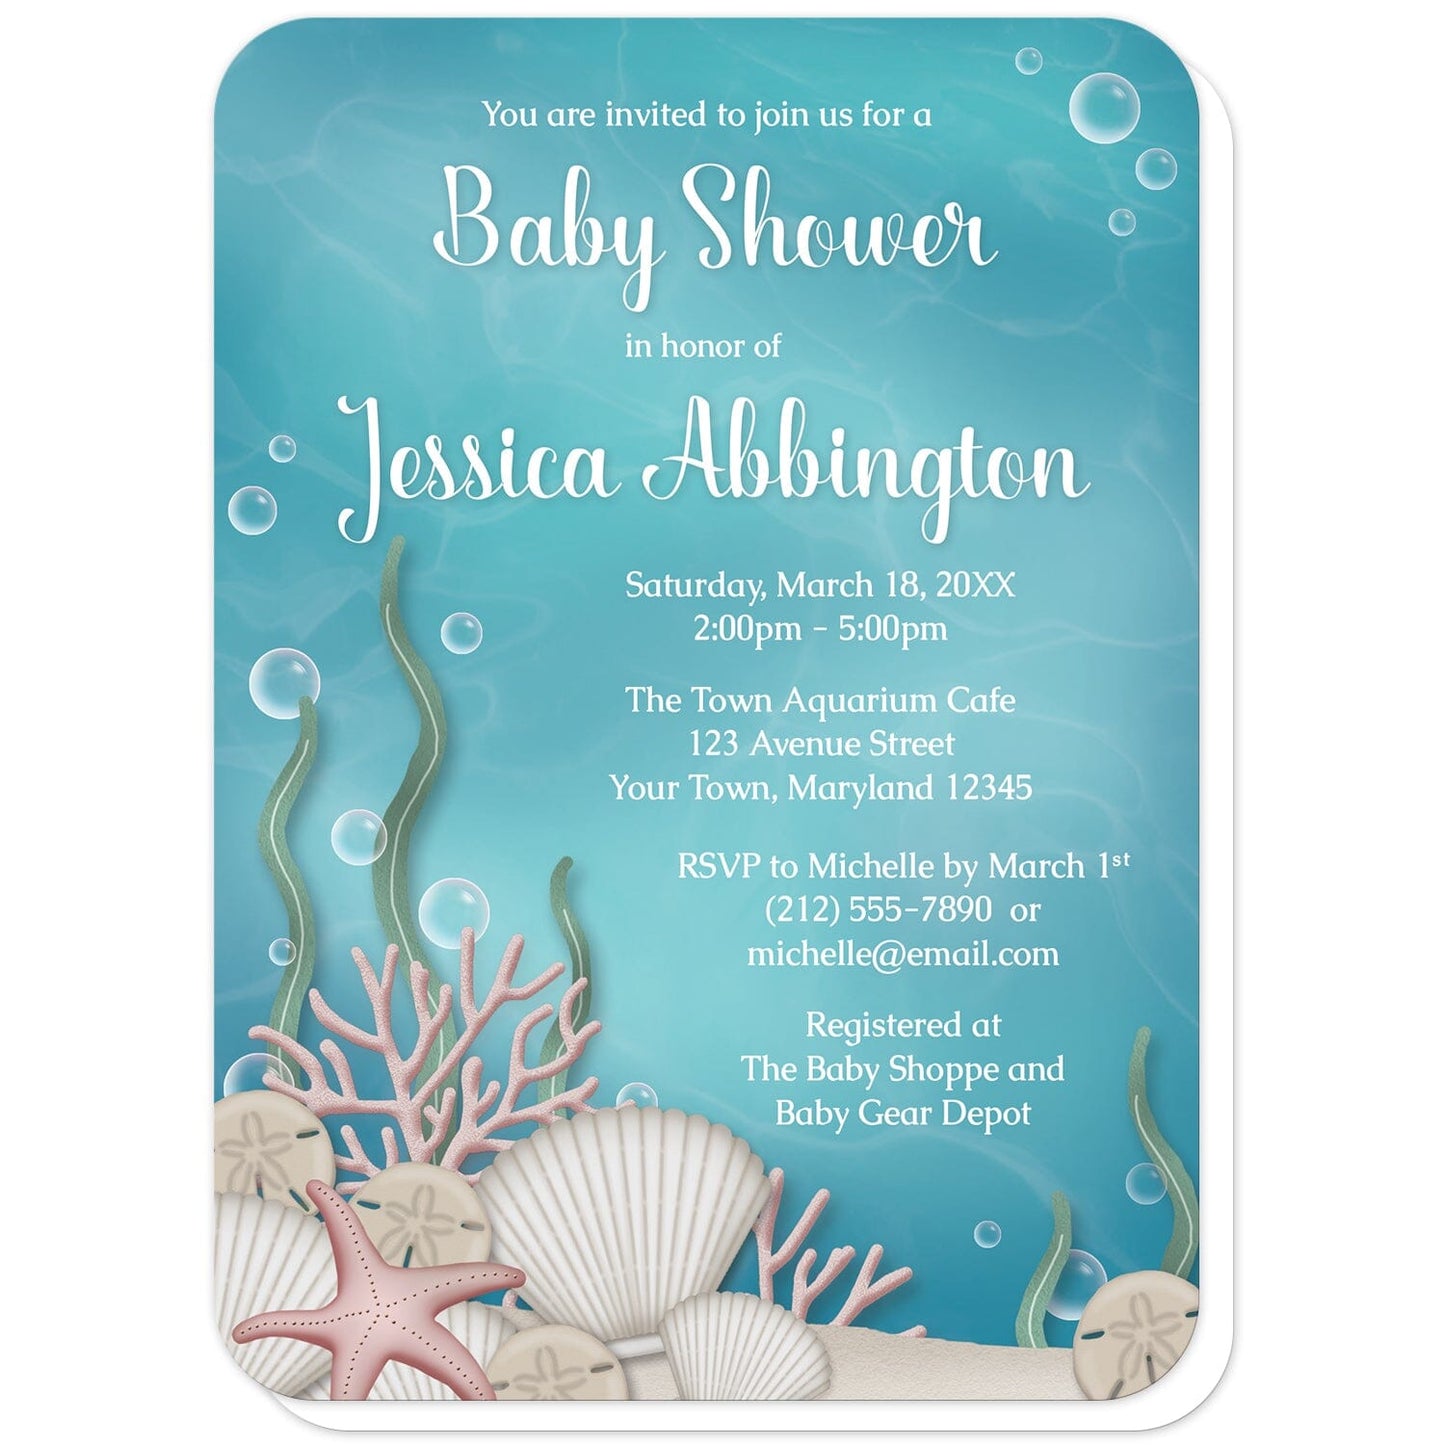 Whimsical Under the Sea Baby Shower Invitations (with rounded corners) at Artistically Invited. Beautifully illustrated whimsical under the sea baby shower invitations with an under the sea or aquarium theme. They are designed with a sandy seabed, assorted seashells, bubbles, coral, and kelp with an underwater aqua blue water background. Your personalized baby shower celebration details are custom printed in white over the water background.